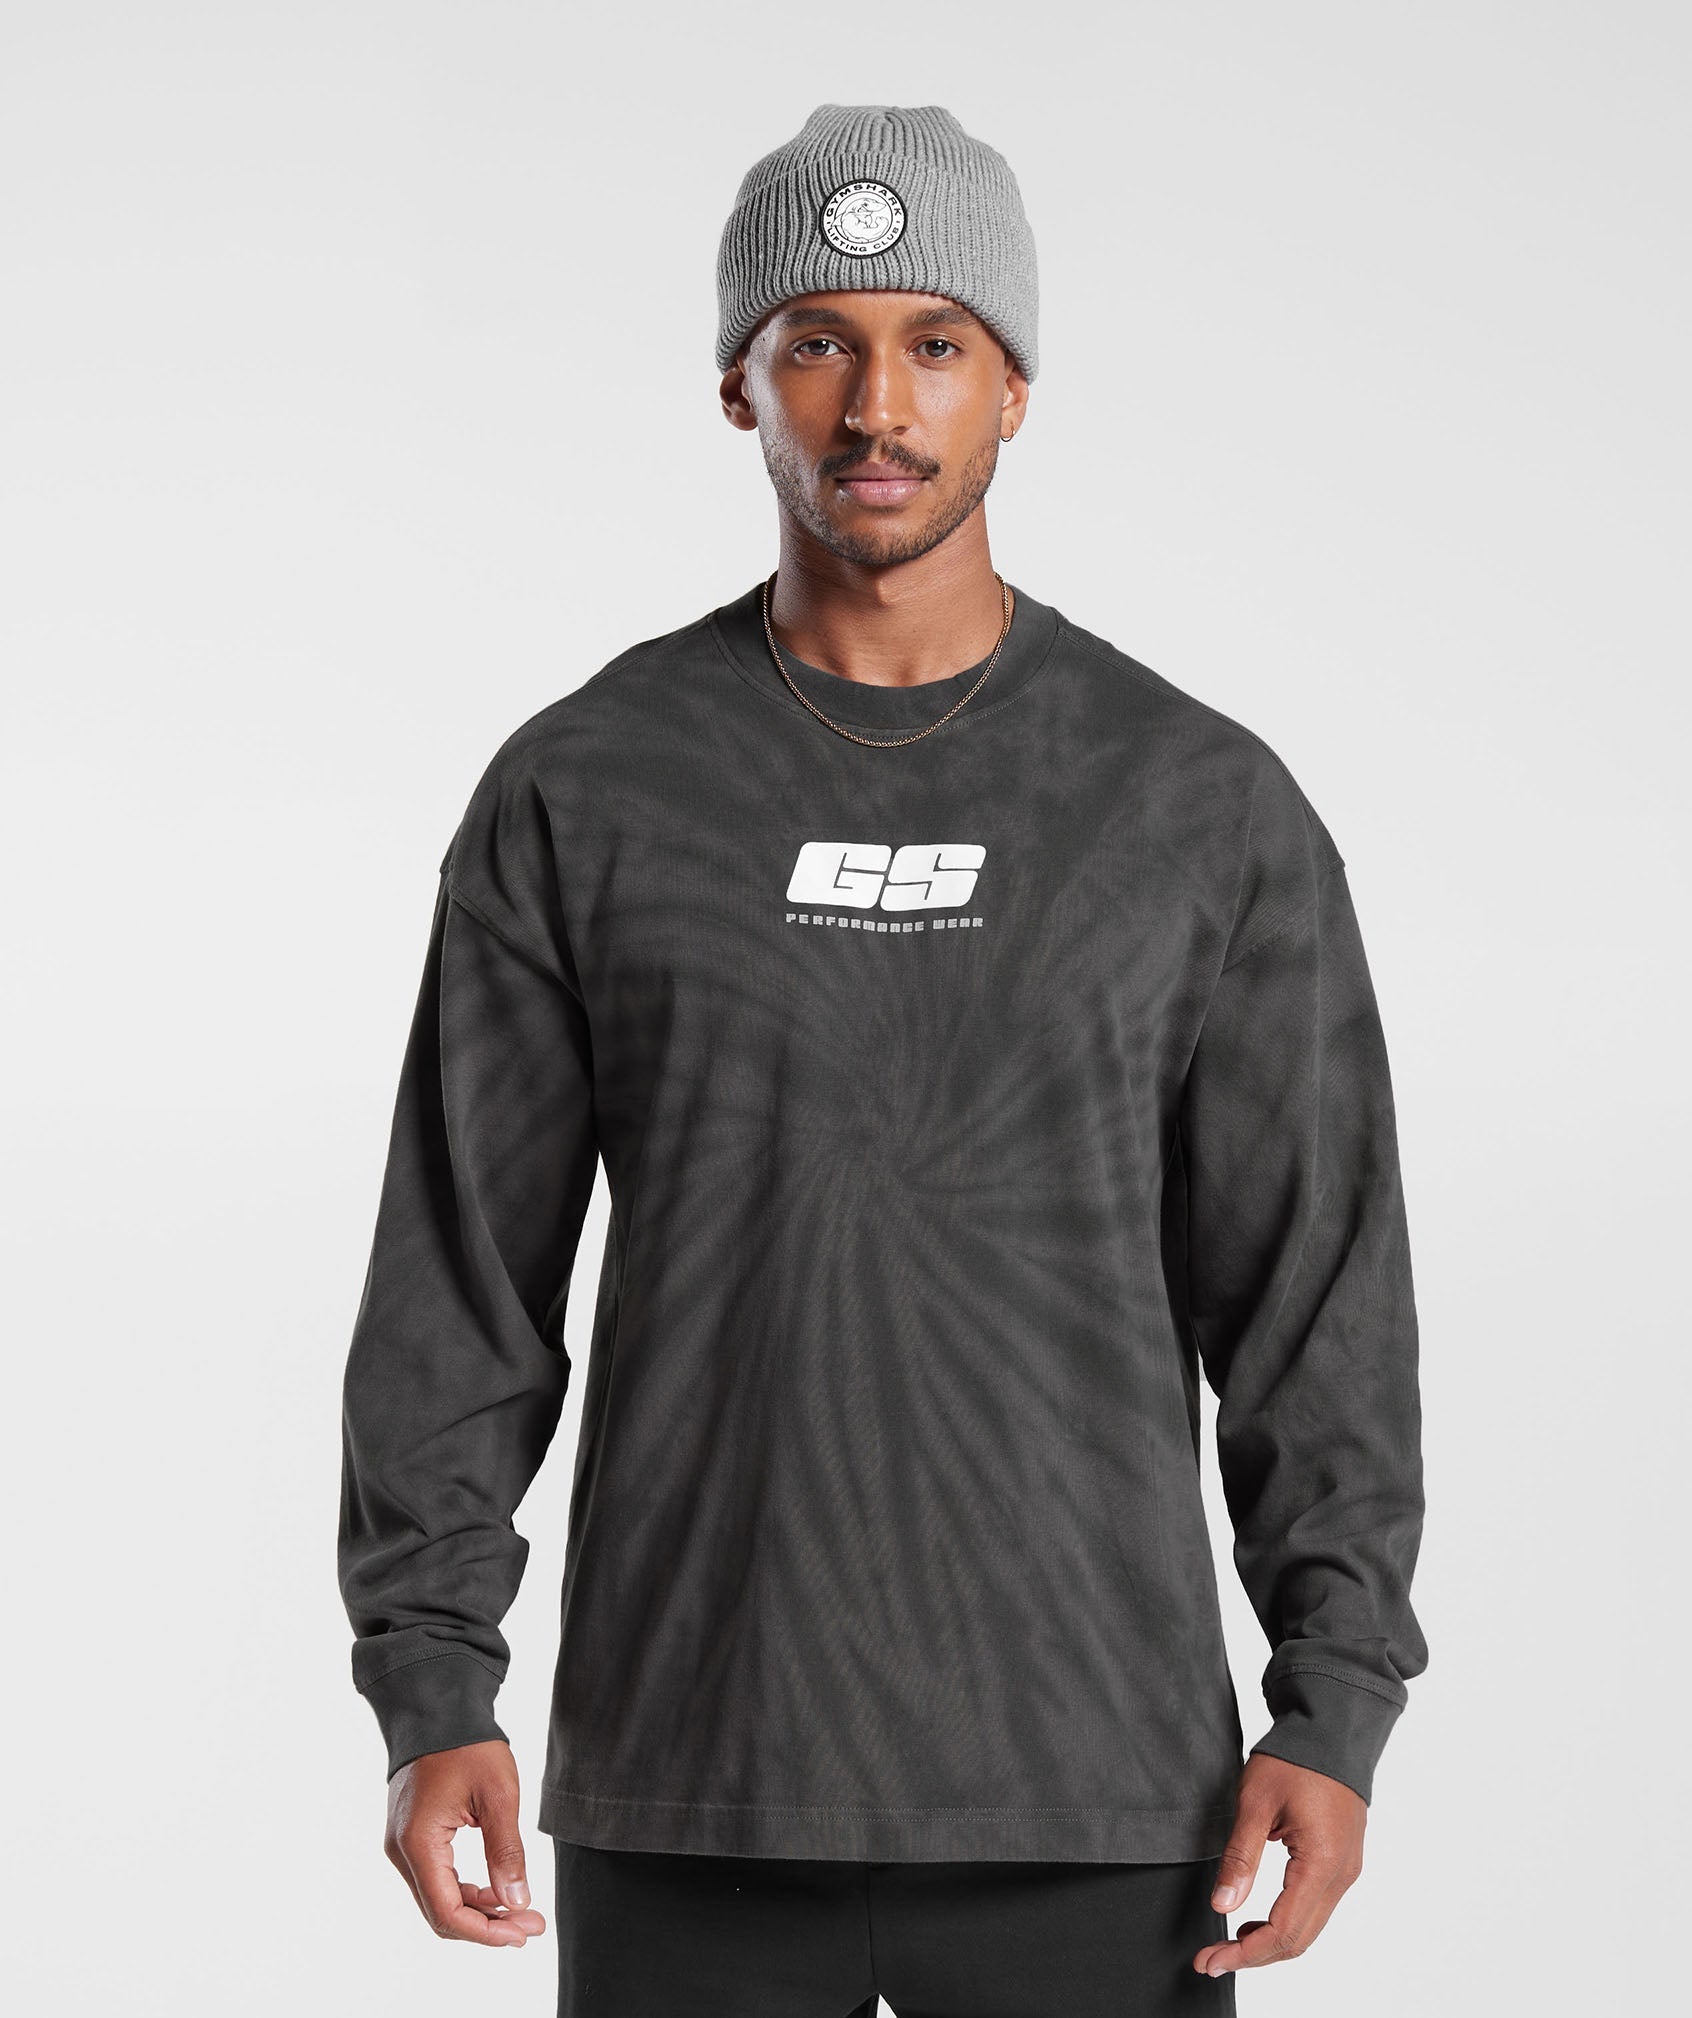 Rest Day Long Sleeve T-Shirt in Silhouette Grey/Black/Spiral Optic Wash - view 1